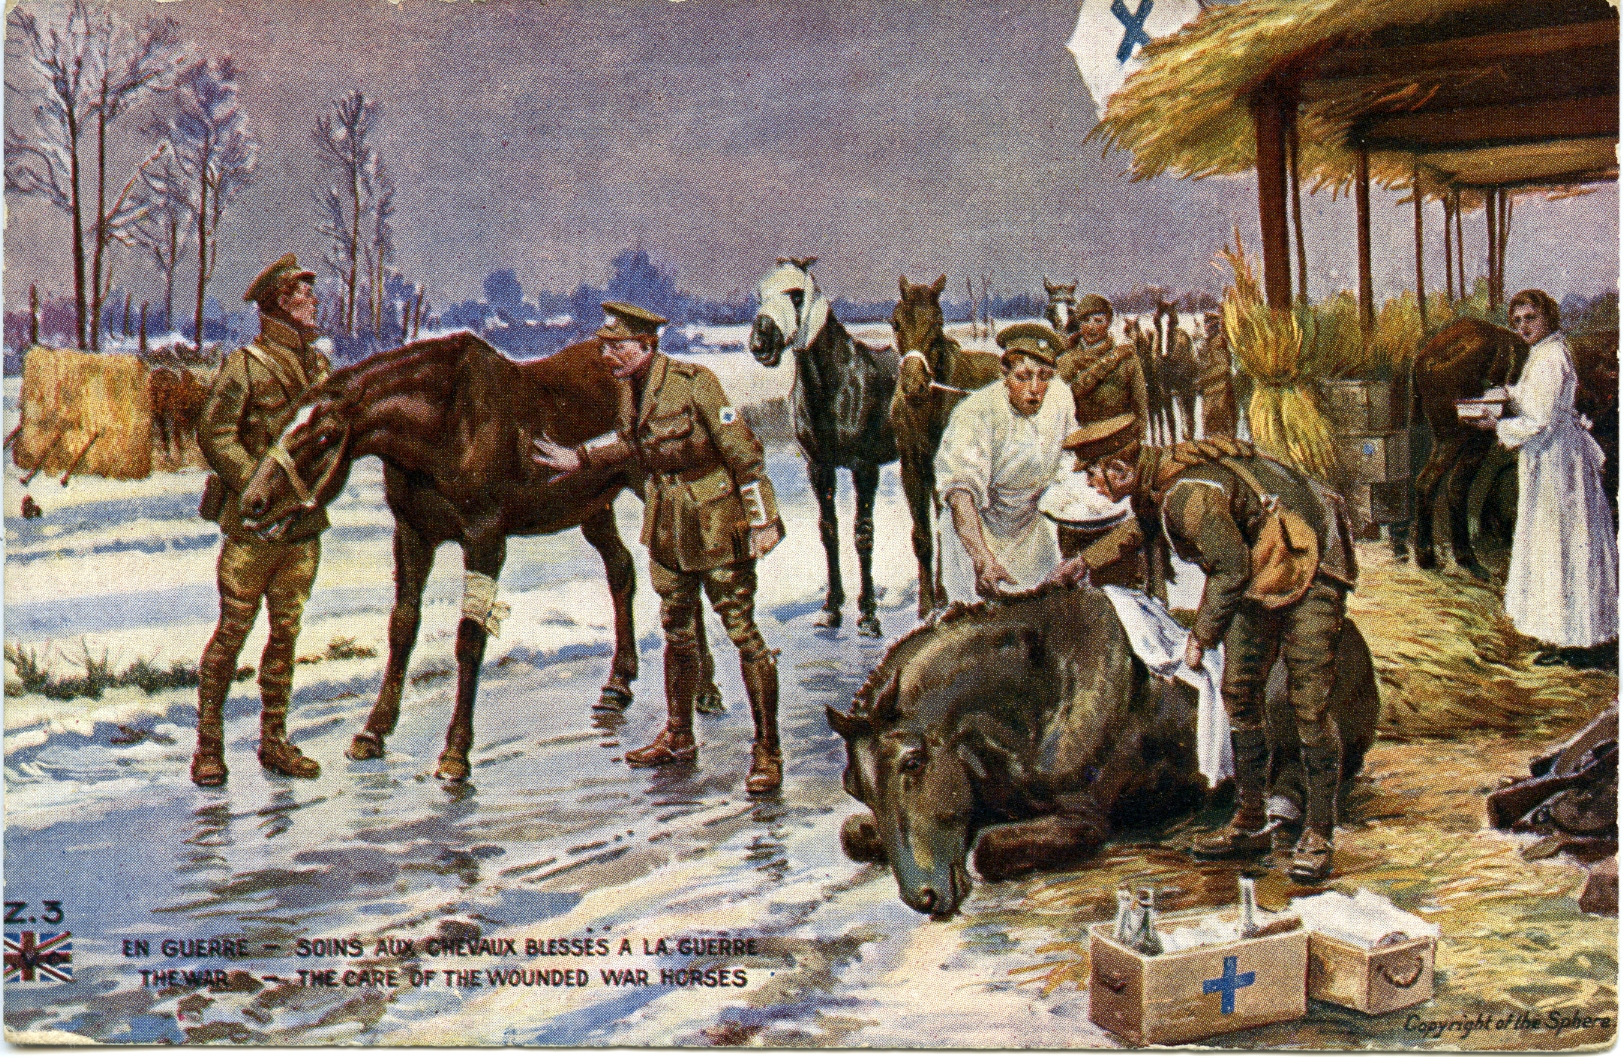 Image shows a painting by Fortunino Matania depicting a Blue Cross field hospital for horses injured in the First World War battlefields